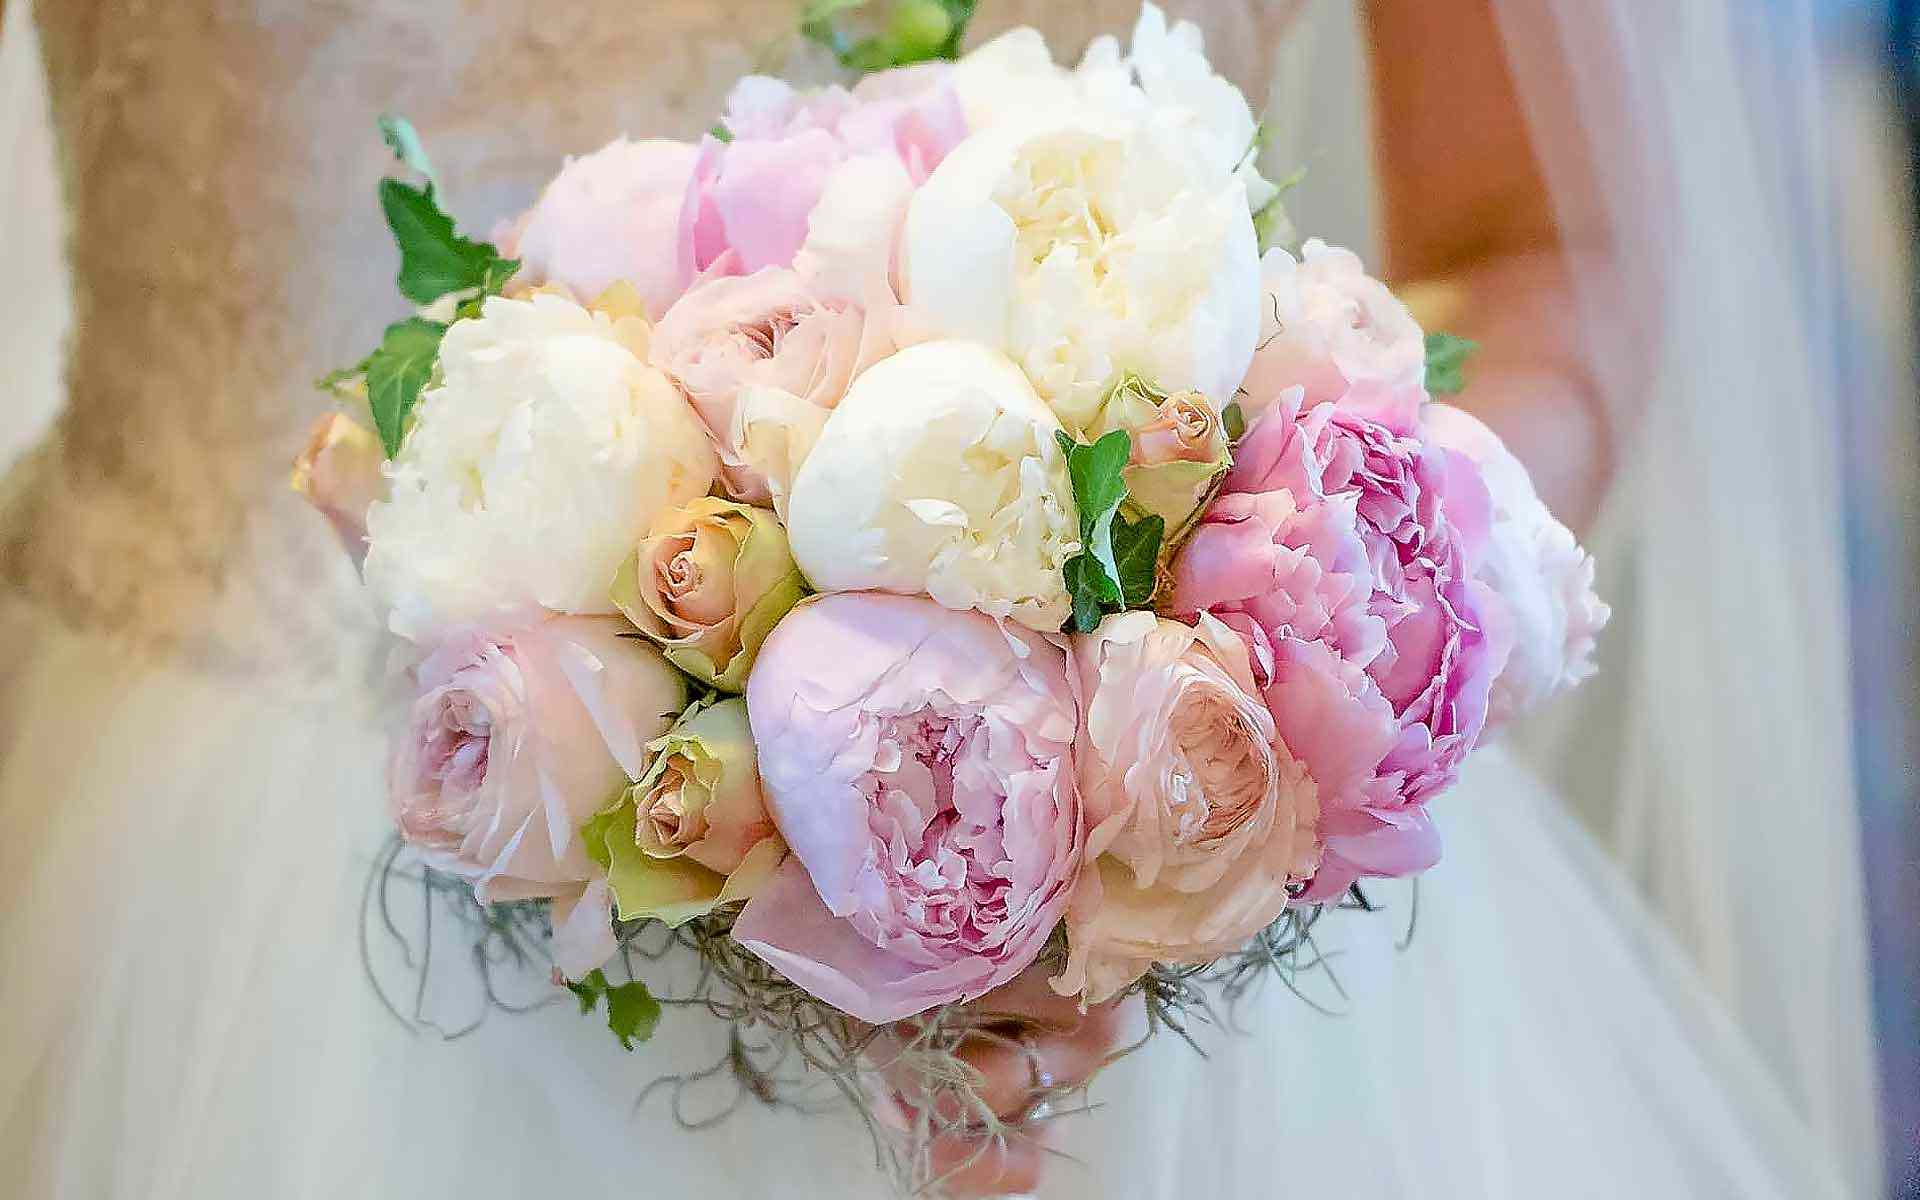 Shabby-Chic-Wedding-Bouquet-With-White-Pink-Peonies-by-Diamond-Events